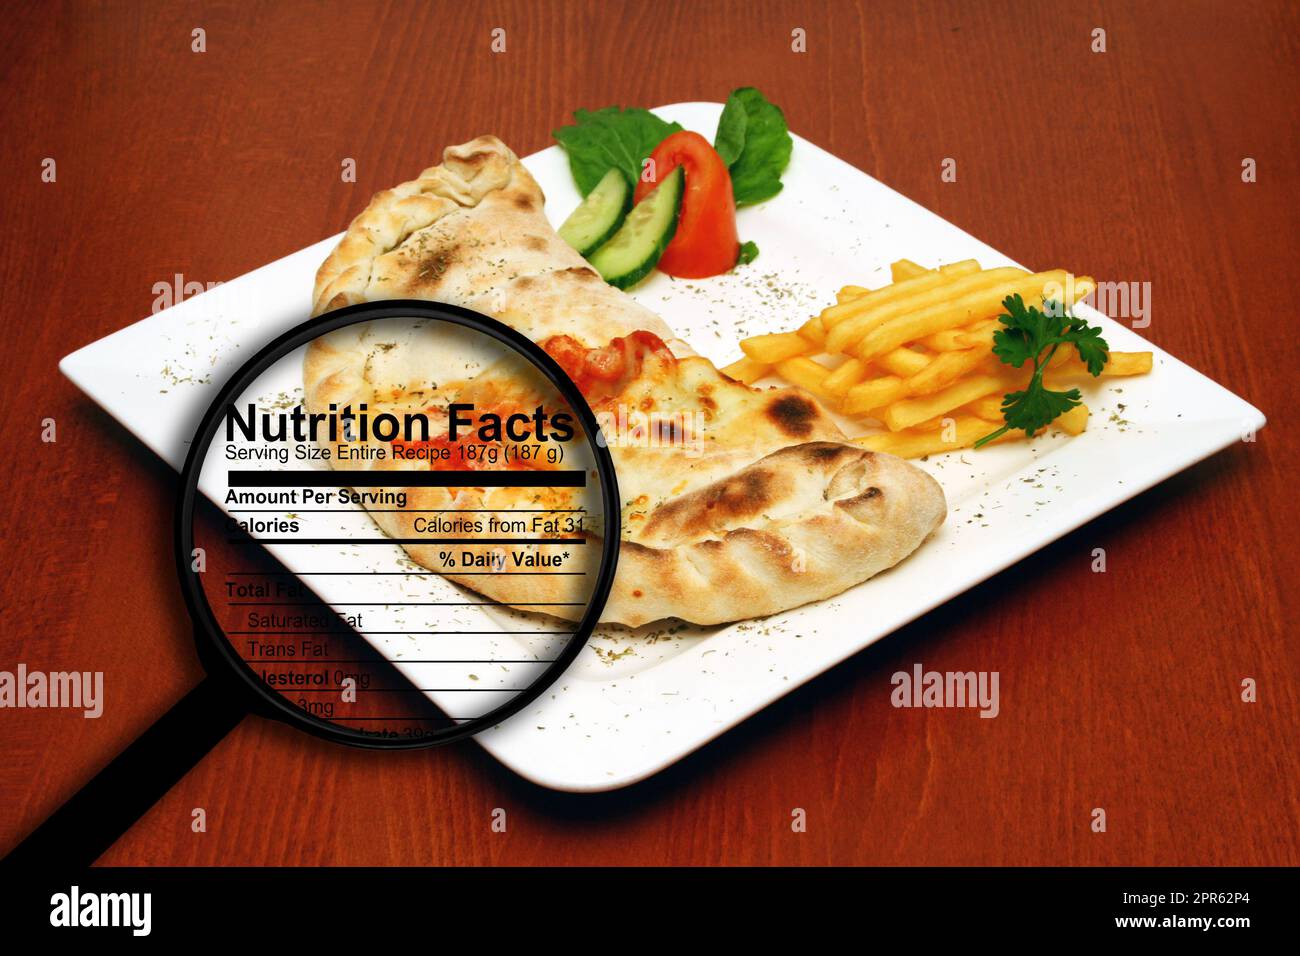 Fast food nutrition facts Stock Photo